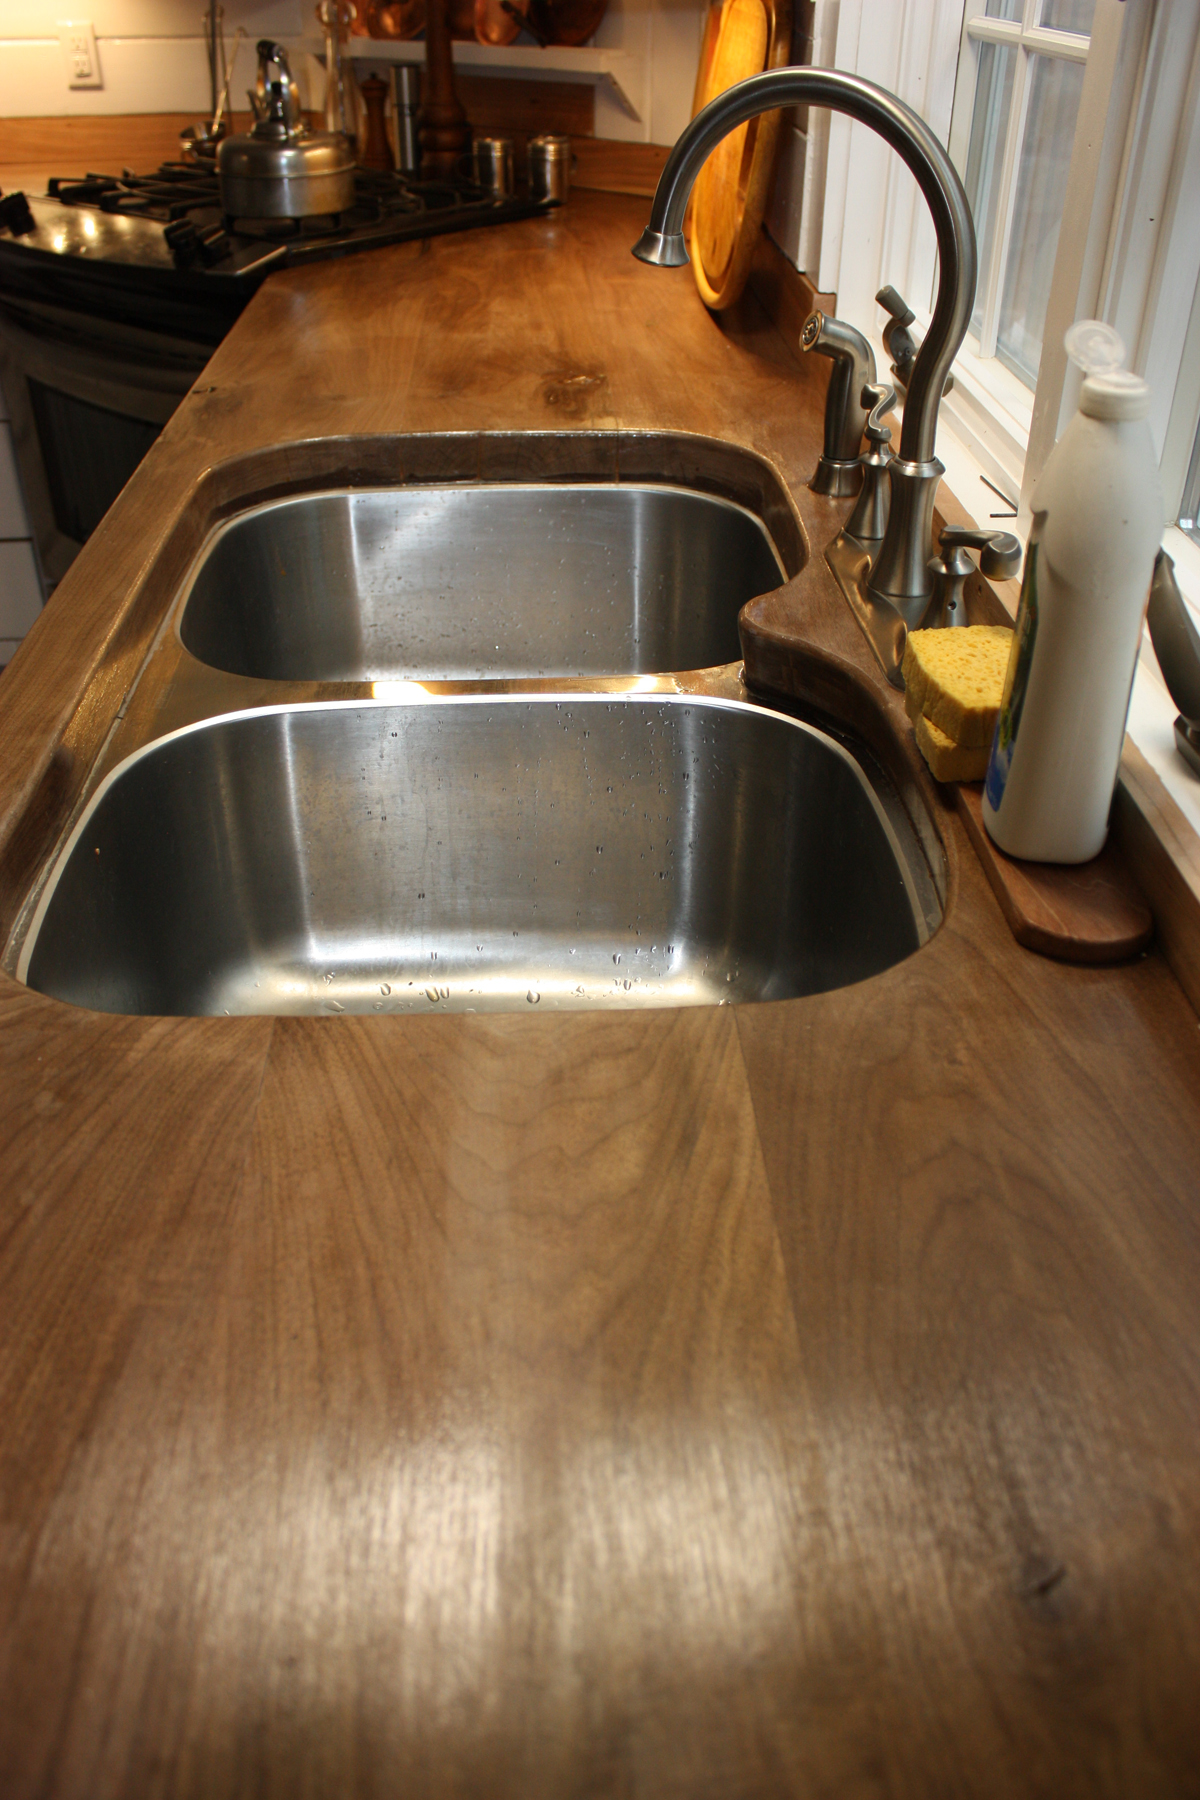 How To Seal A Solid Wood Countertop Safely, How To Stain And Seal Wood Countertops